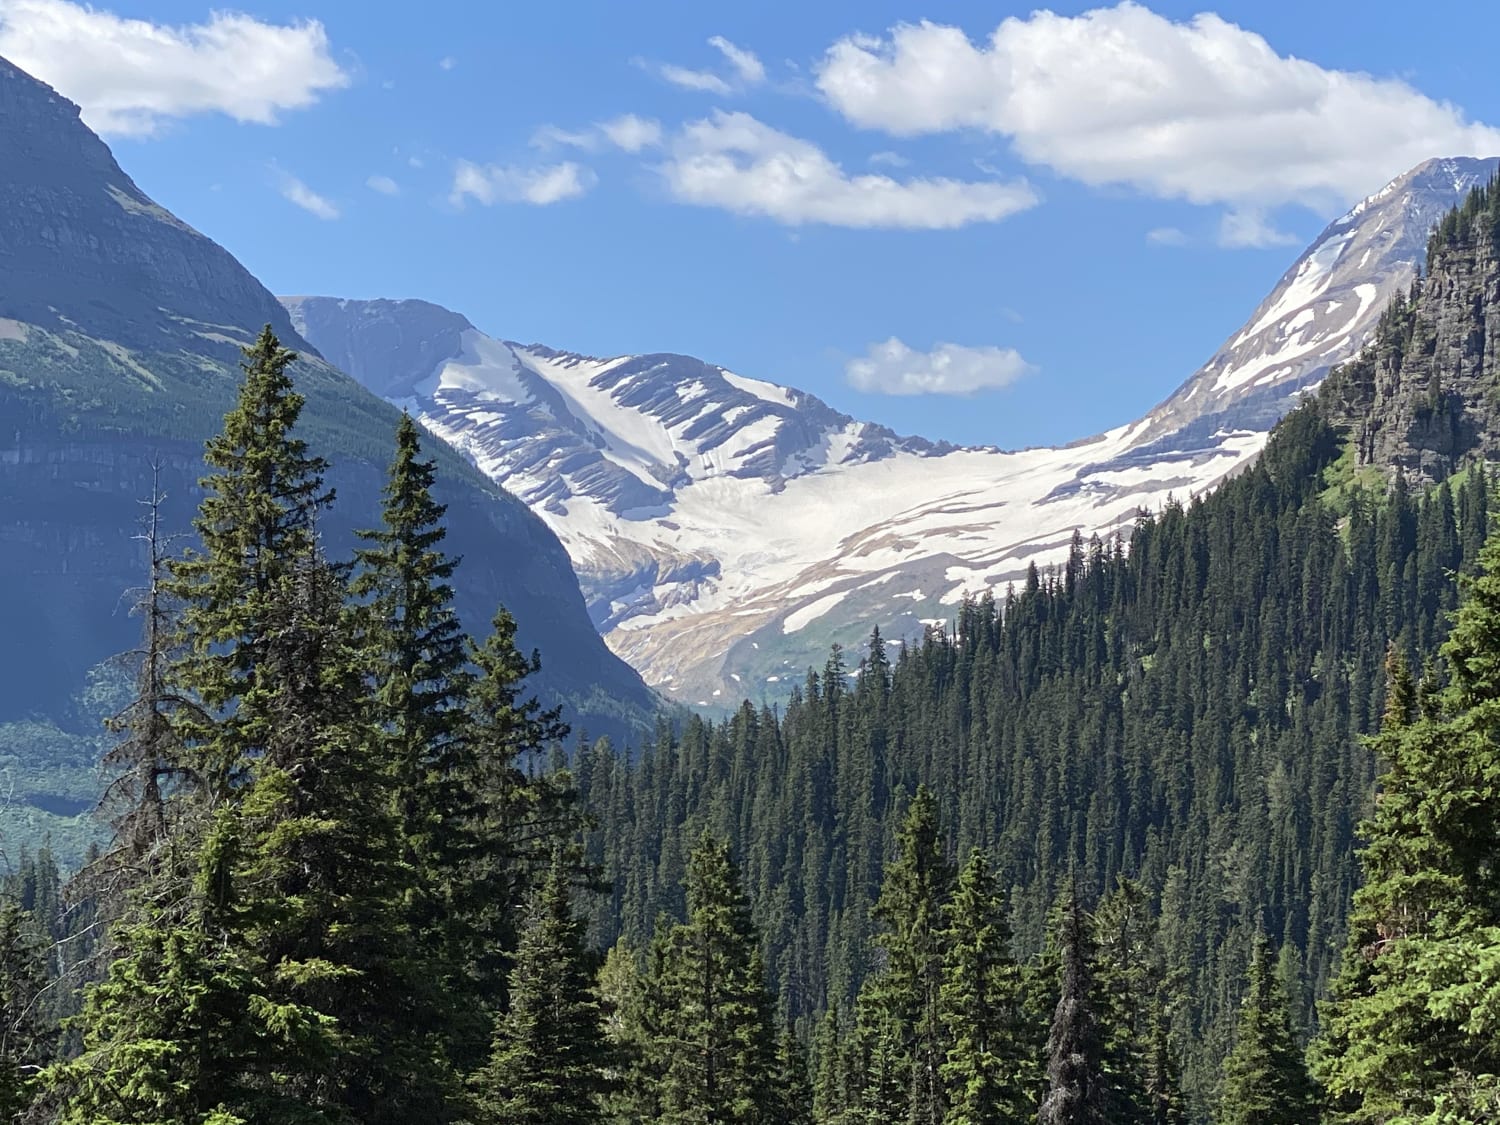 Jackson Glacier in Glacier National Park. One of the few remaining actual glaciers in the park. Going To The Sun Road in the park is an absolute must destination for any roadtripper!